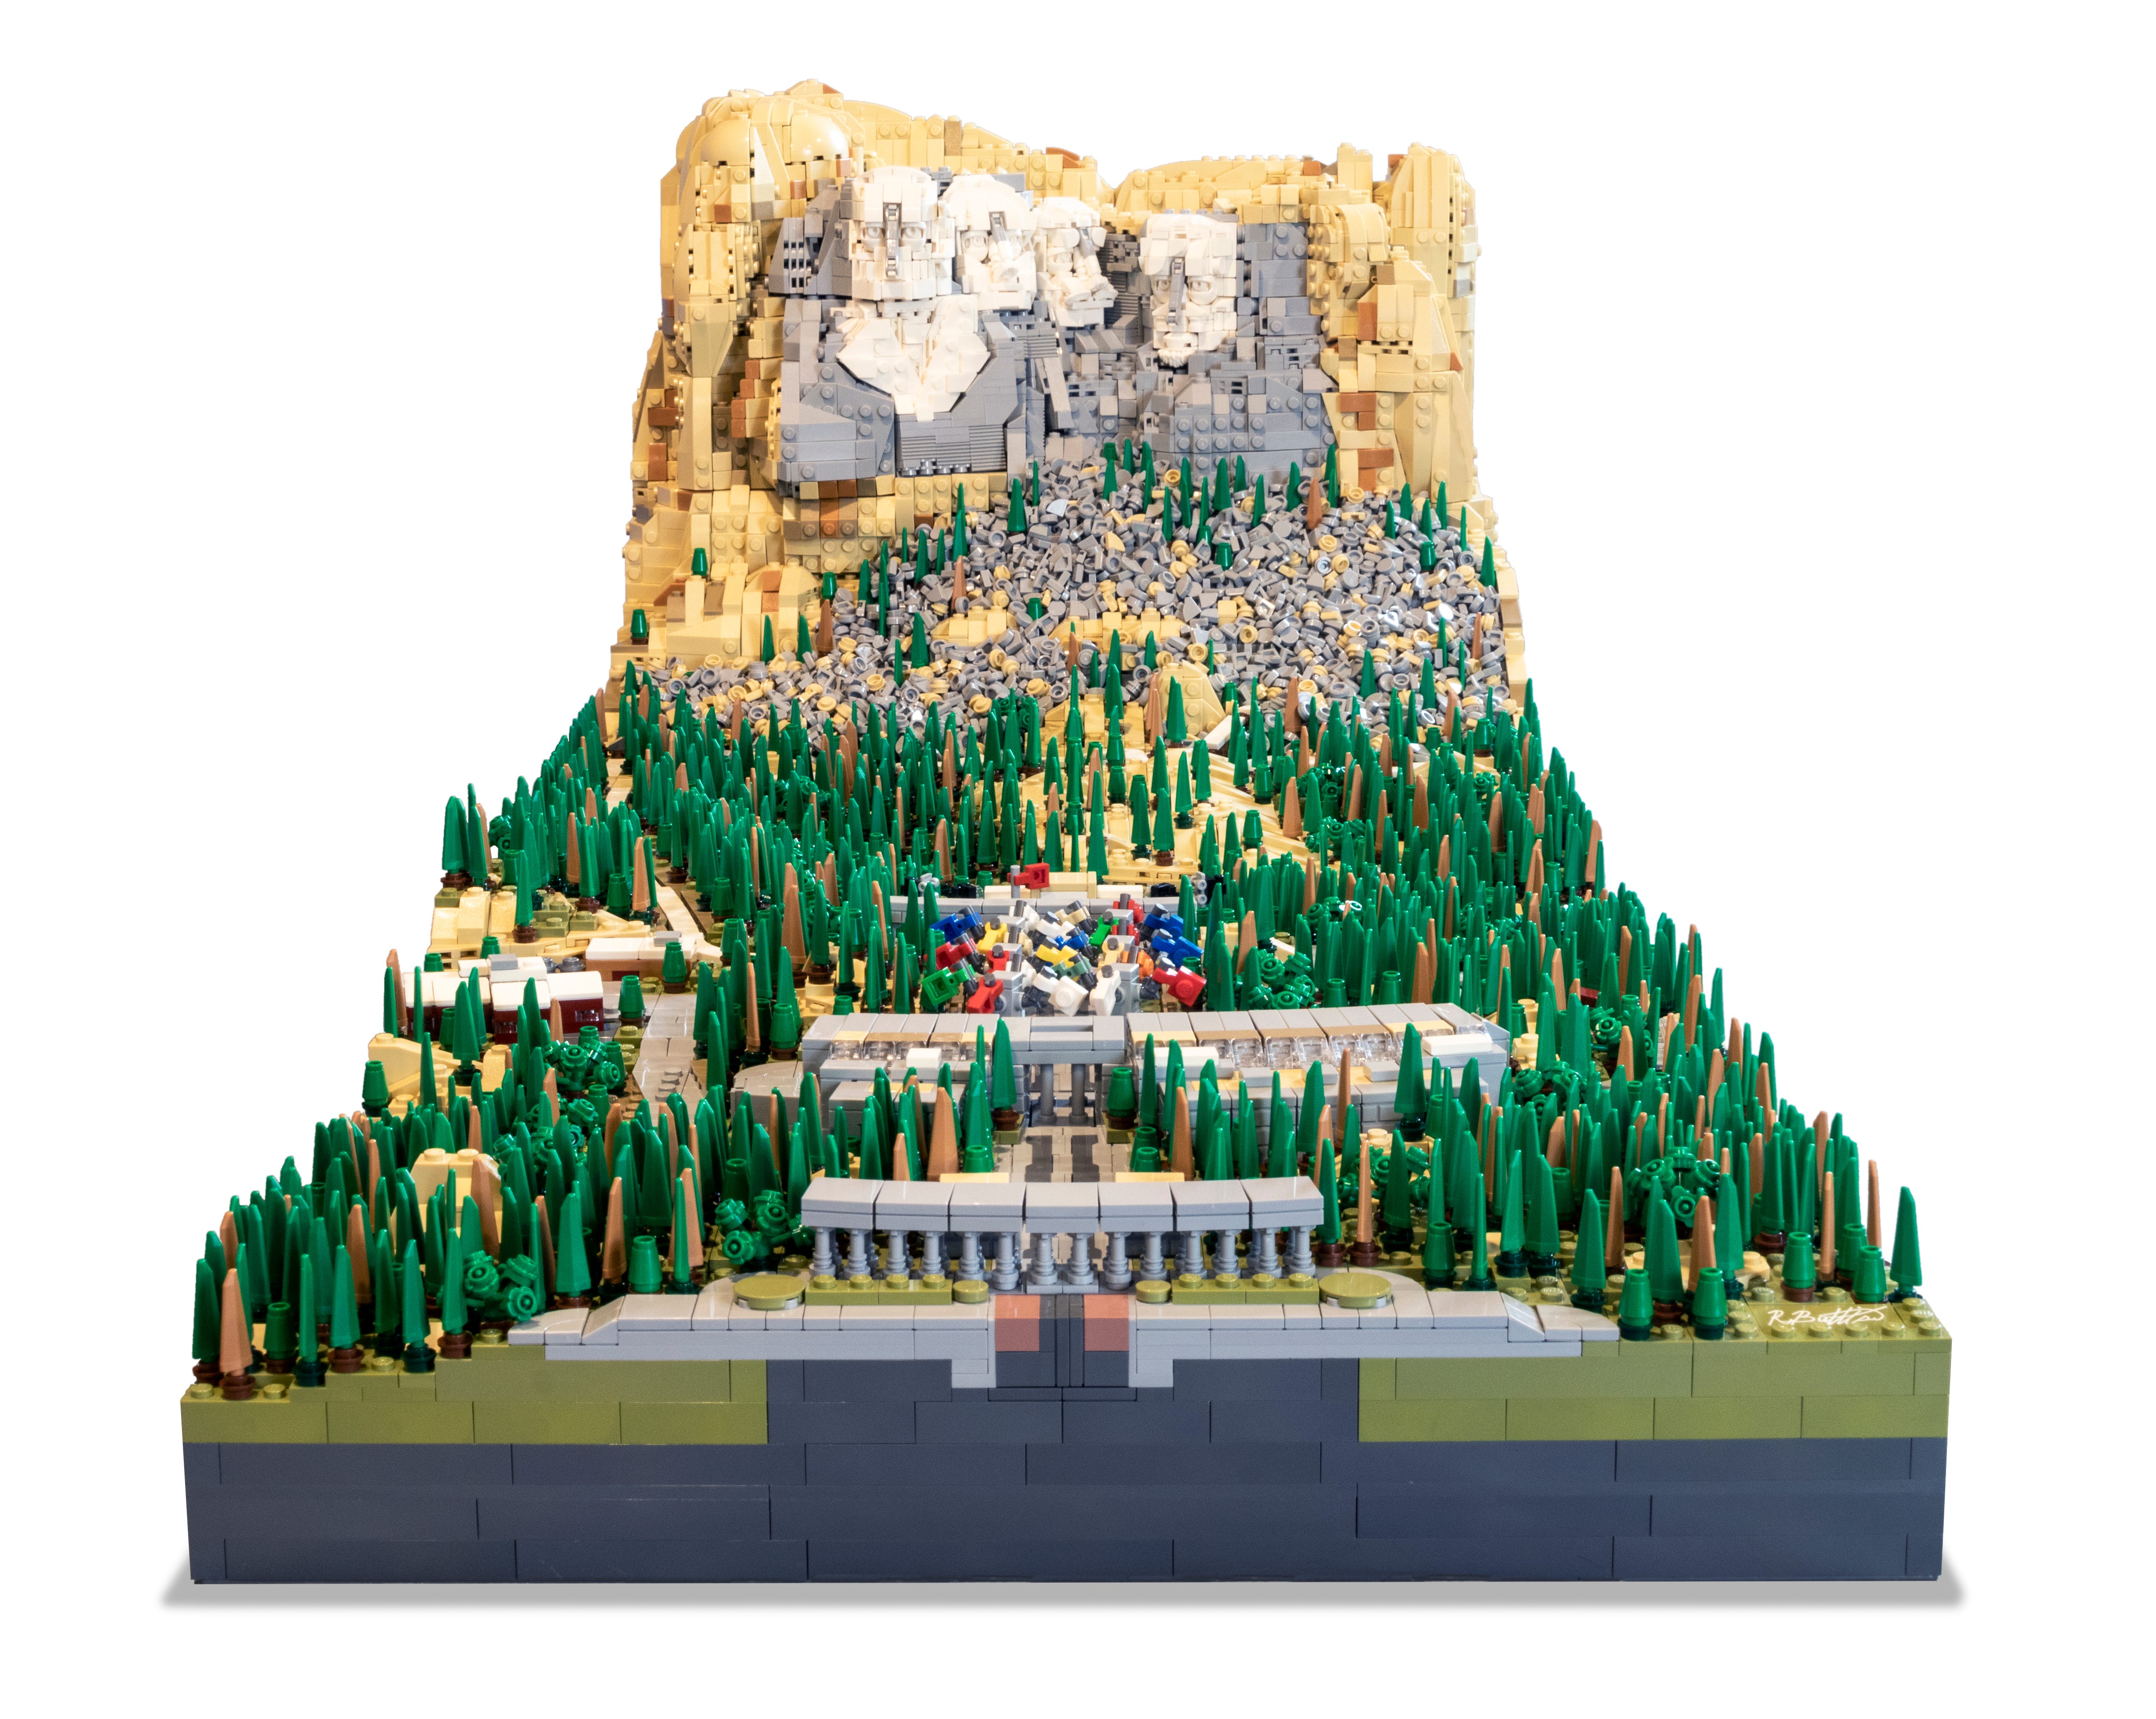 Wade Statistisk social Great bricks, great places: Artist makes Mount Rushmore entirely out of Lego